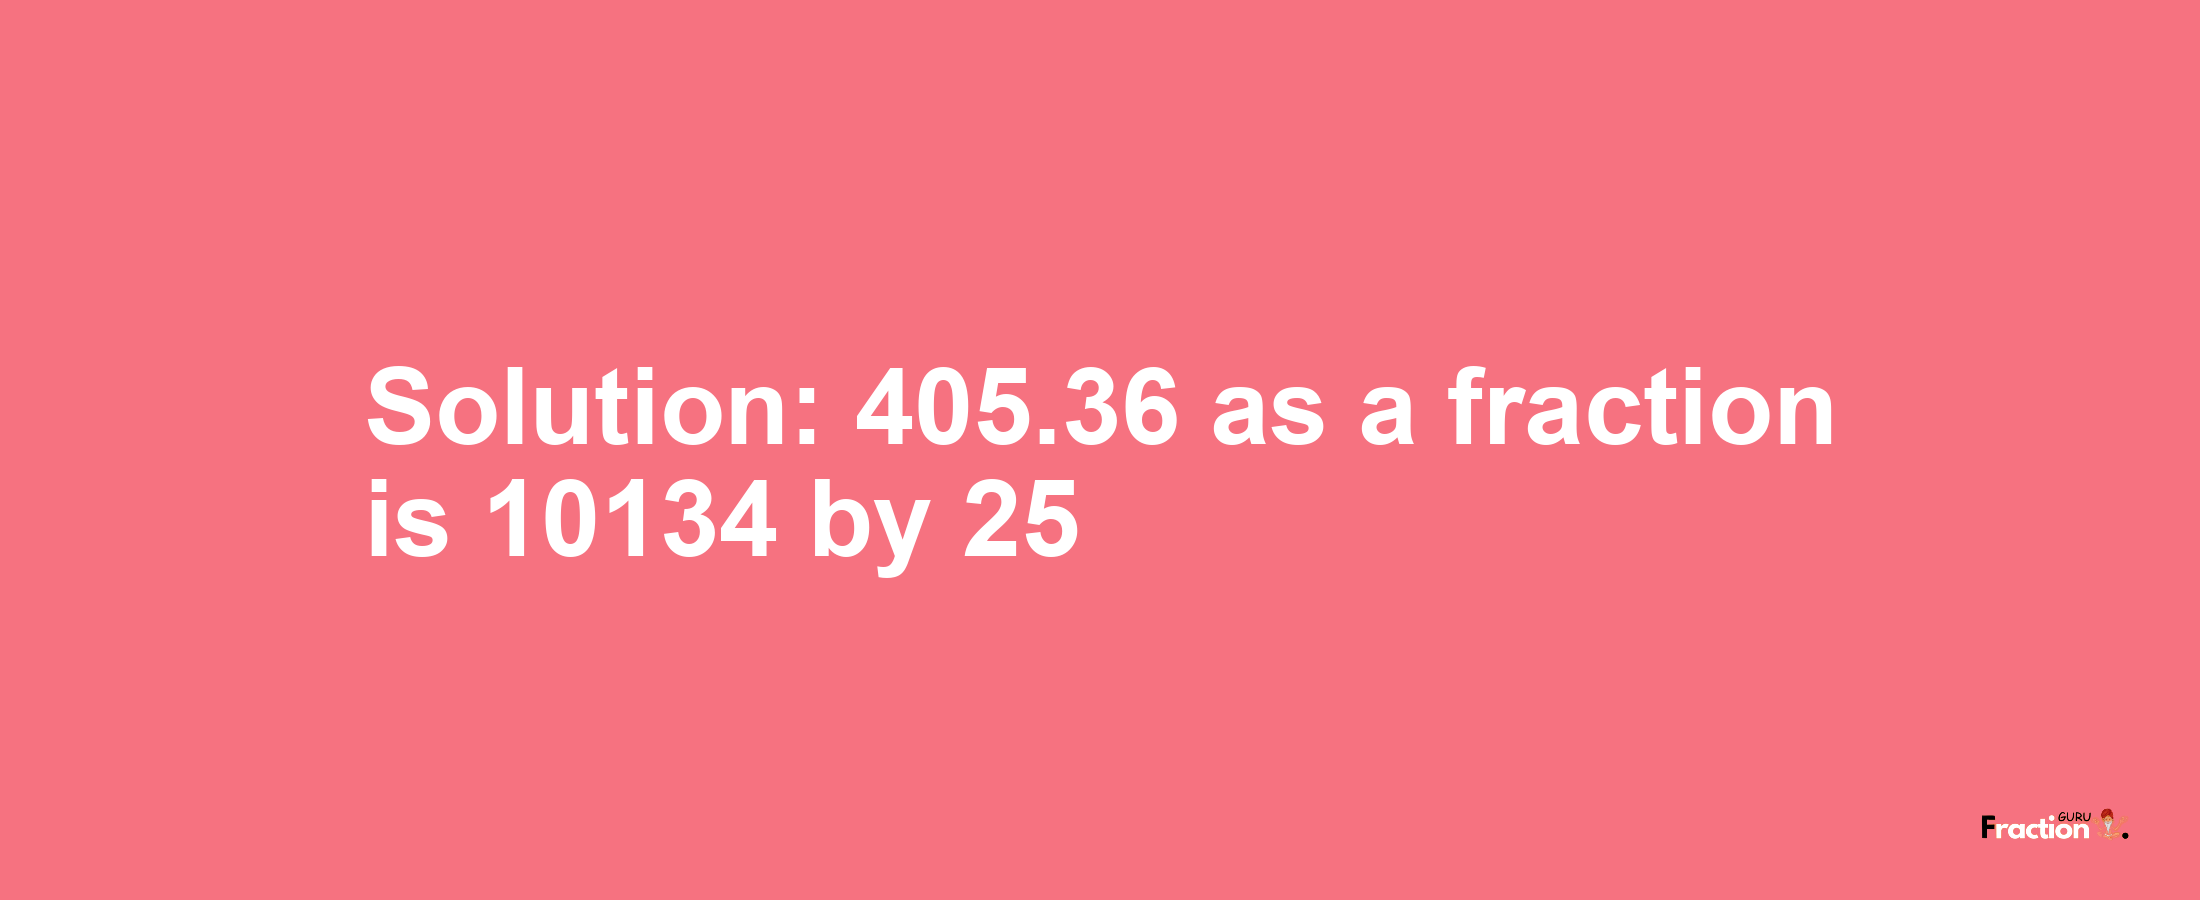 Solution:405.36 as a fraction is 10134/25